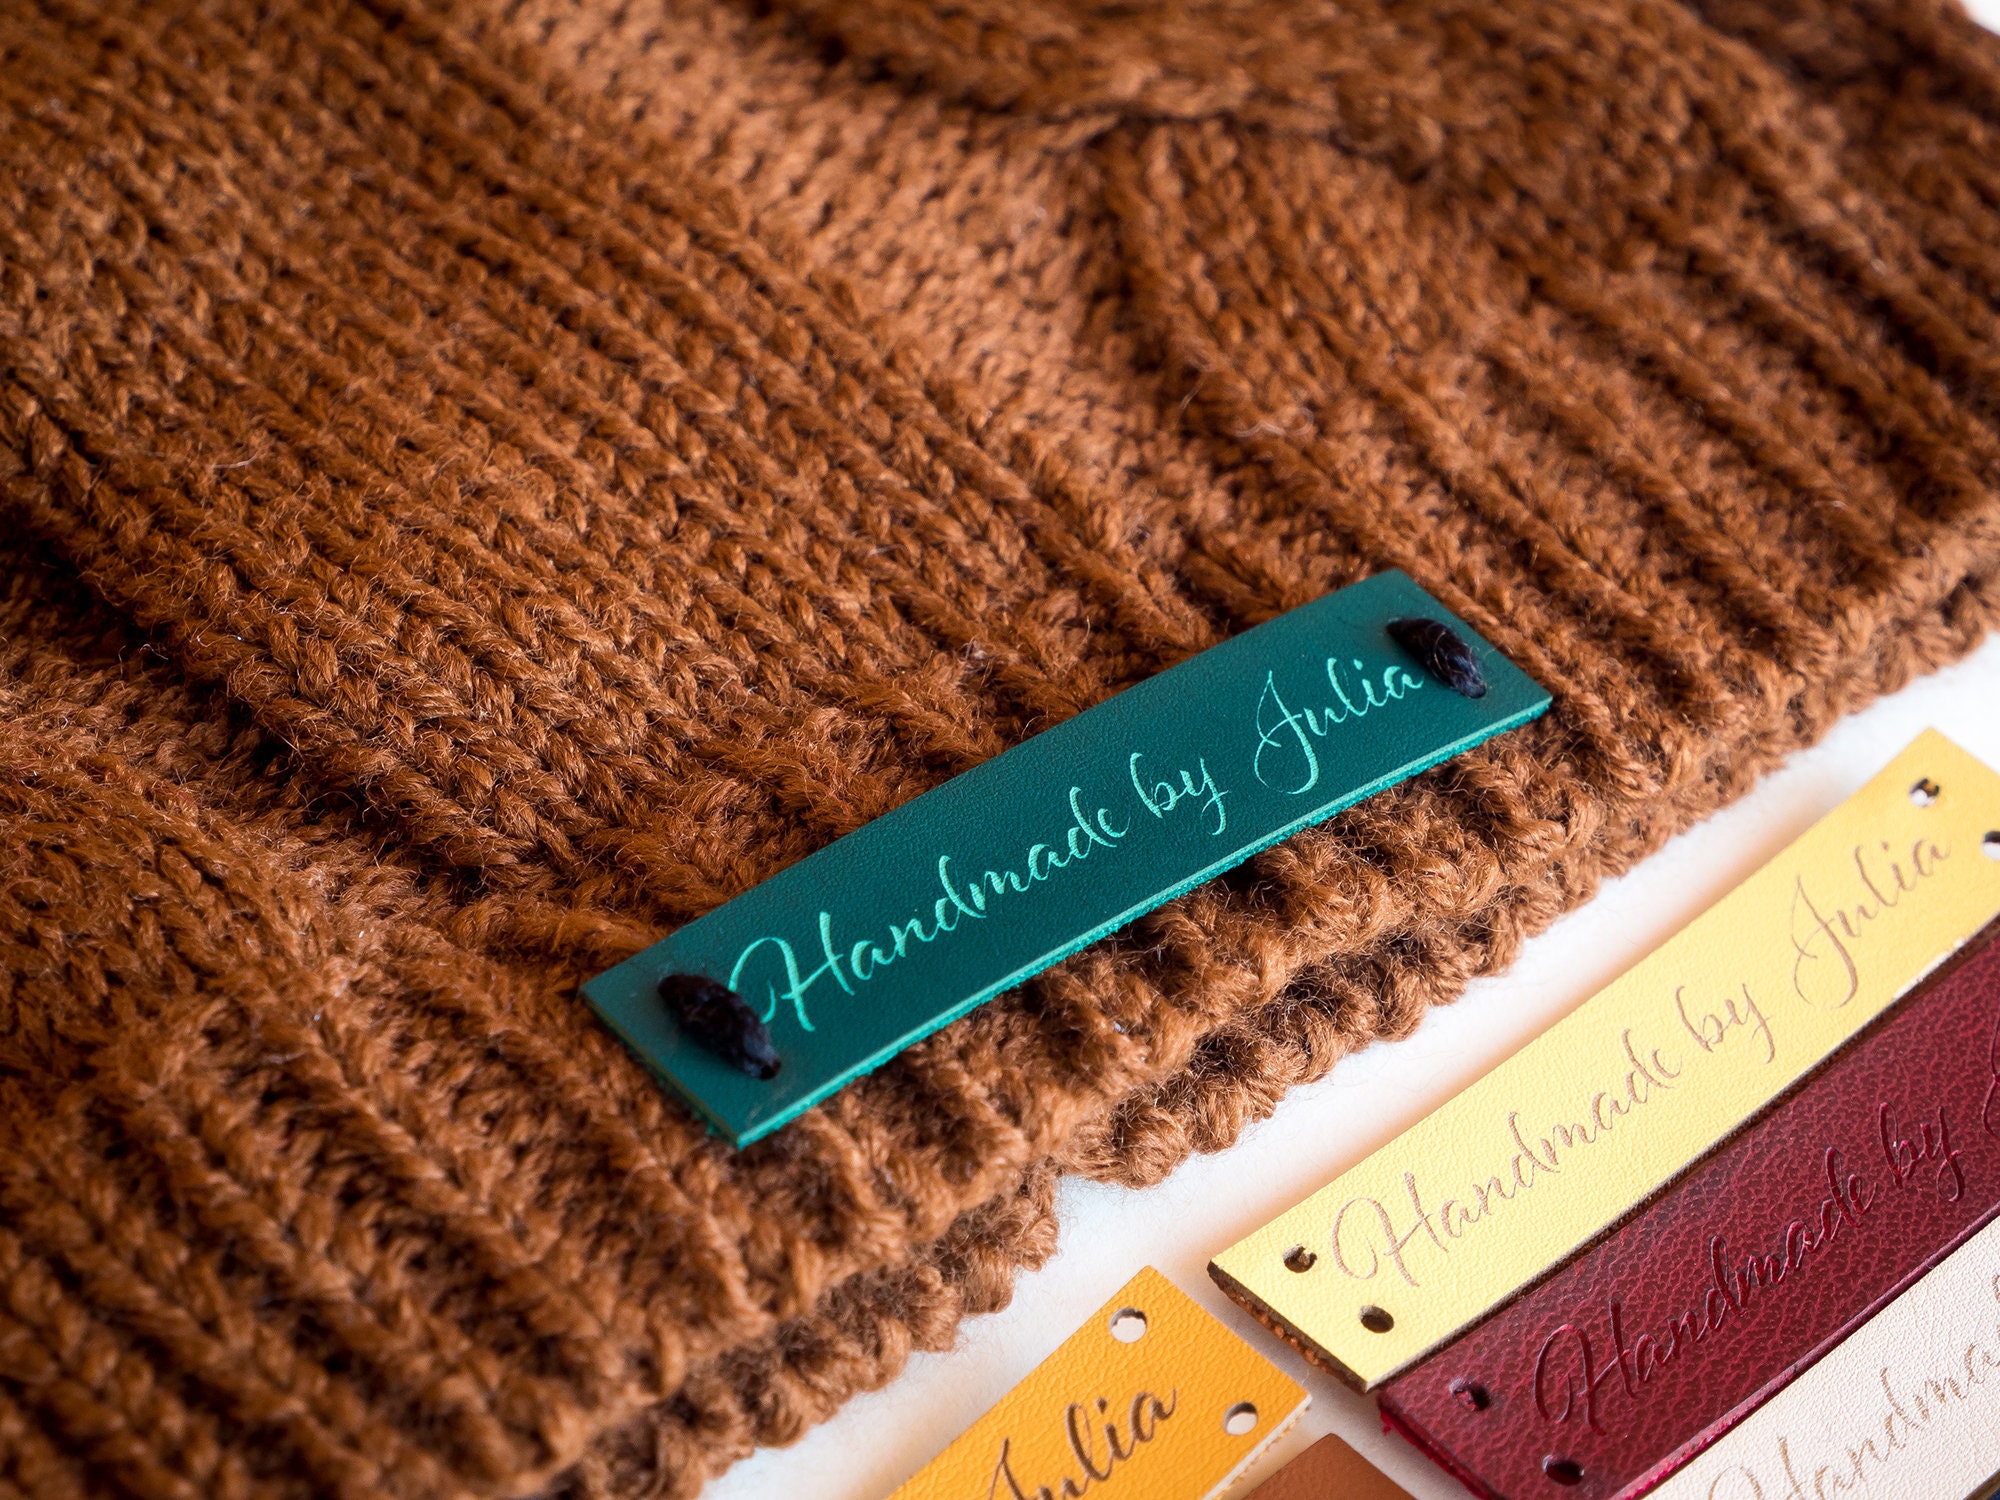  Vegan Handmade Screw-On Tags, Personalized Faux Leather  Branding Labels for HandKnit Items with Rivets, Customized Small Suede Tags,  Handmade Tags for Beanie Tags, Clothing, Crochet, Logo,Text Print : Handmade  Products